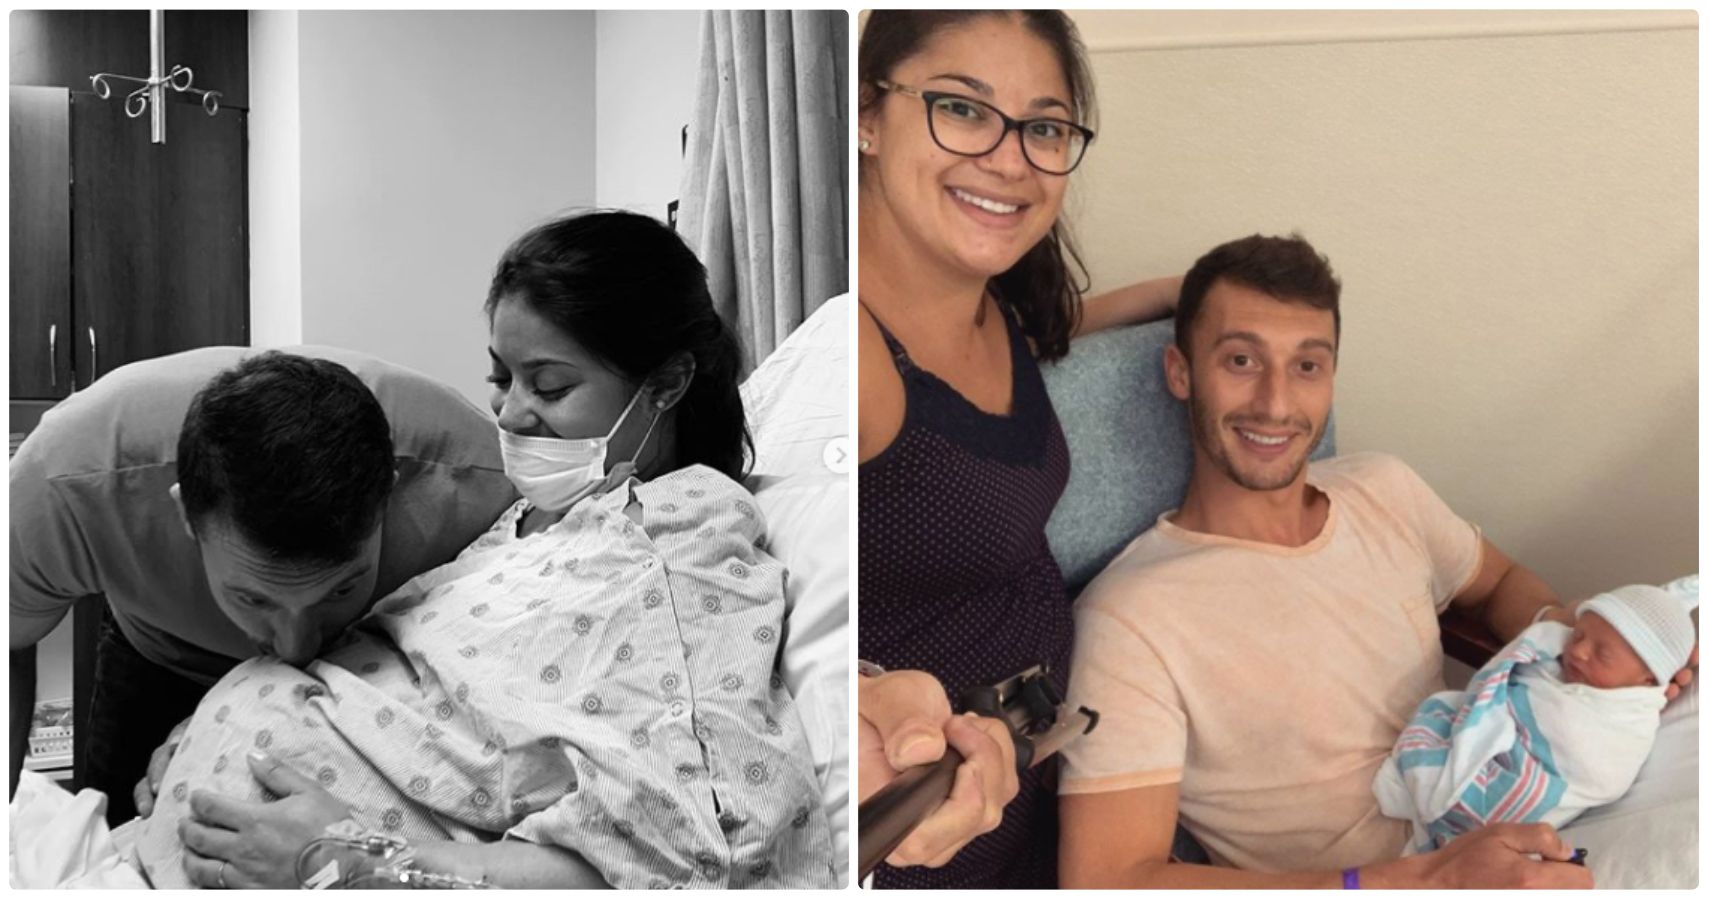 90 Day Fiancé star Loren recently opened up about new motherhood and the im...